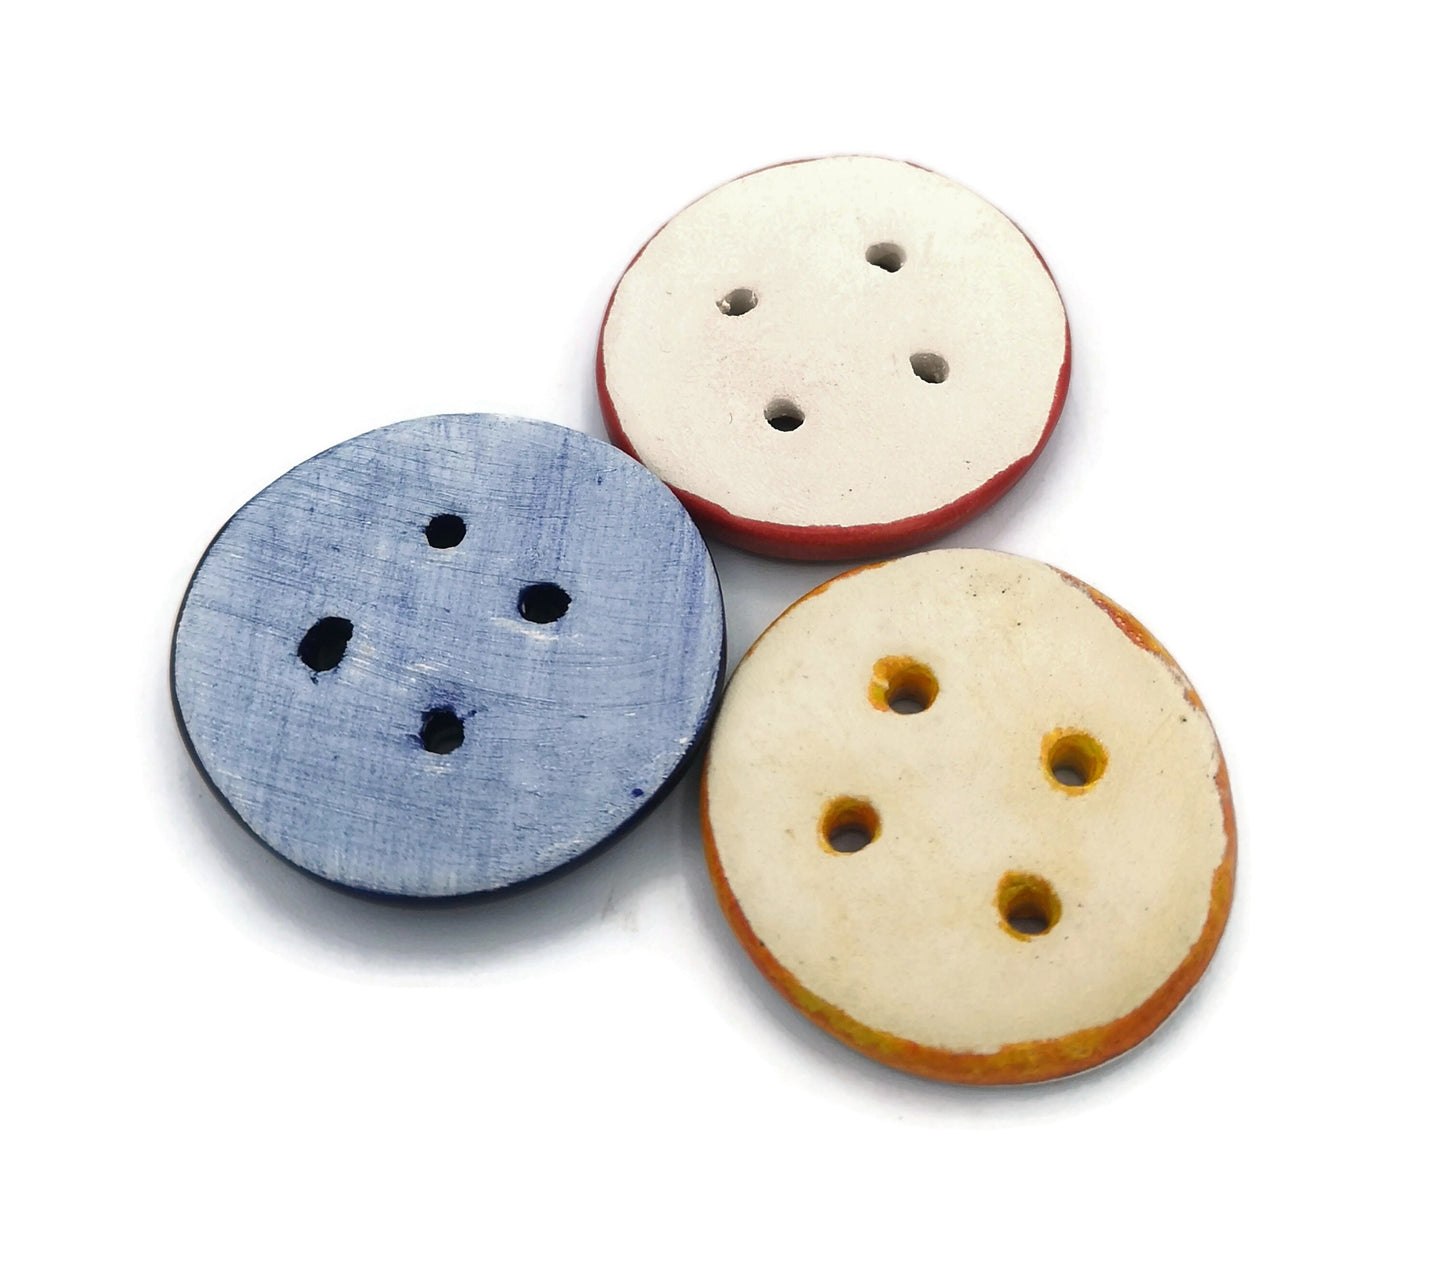 3Pcs Extra Large Buttons, 3 Pcs Handmade Ceramic Buttons, Sewing Supplies And Notions, Best Sellers Unique Flat Clay Buttons 4 Holes - Ceramica Ana Rafael